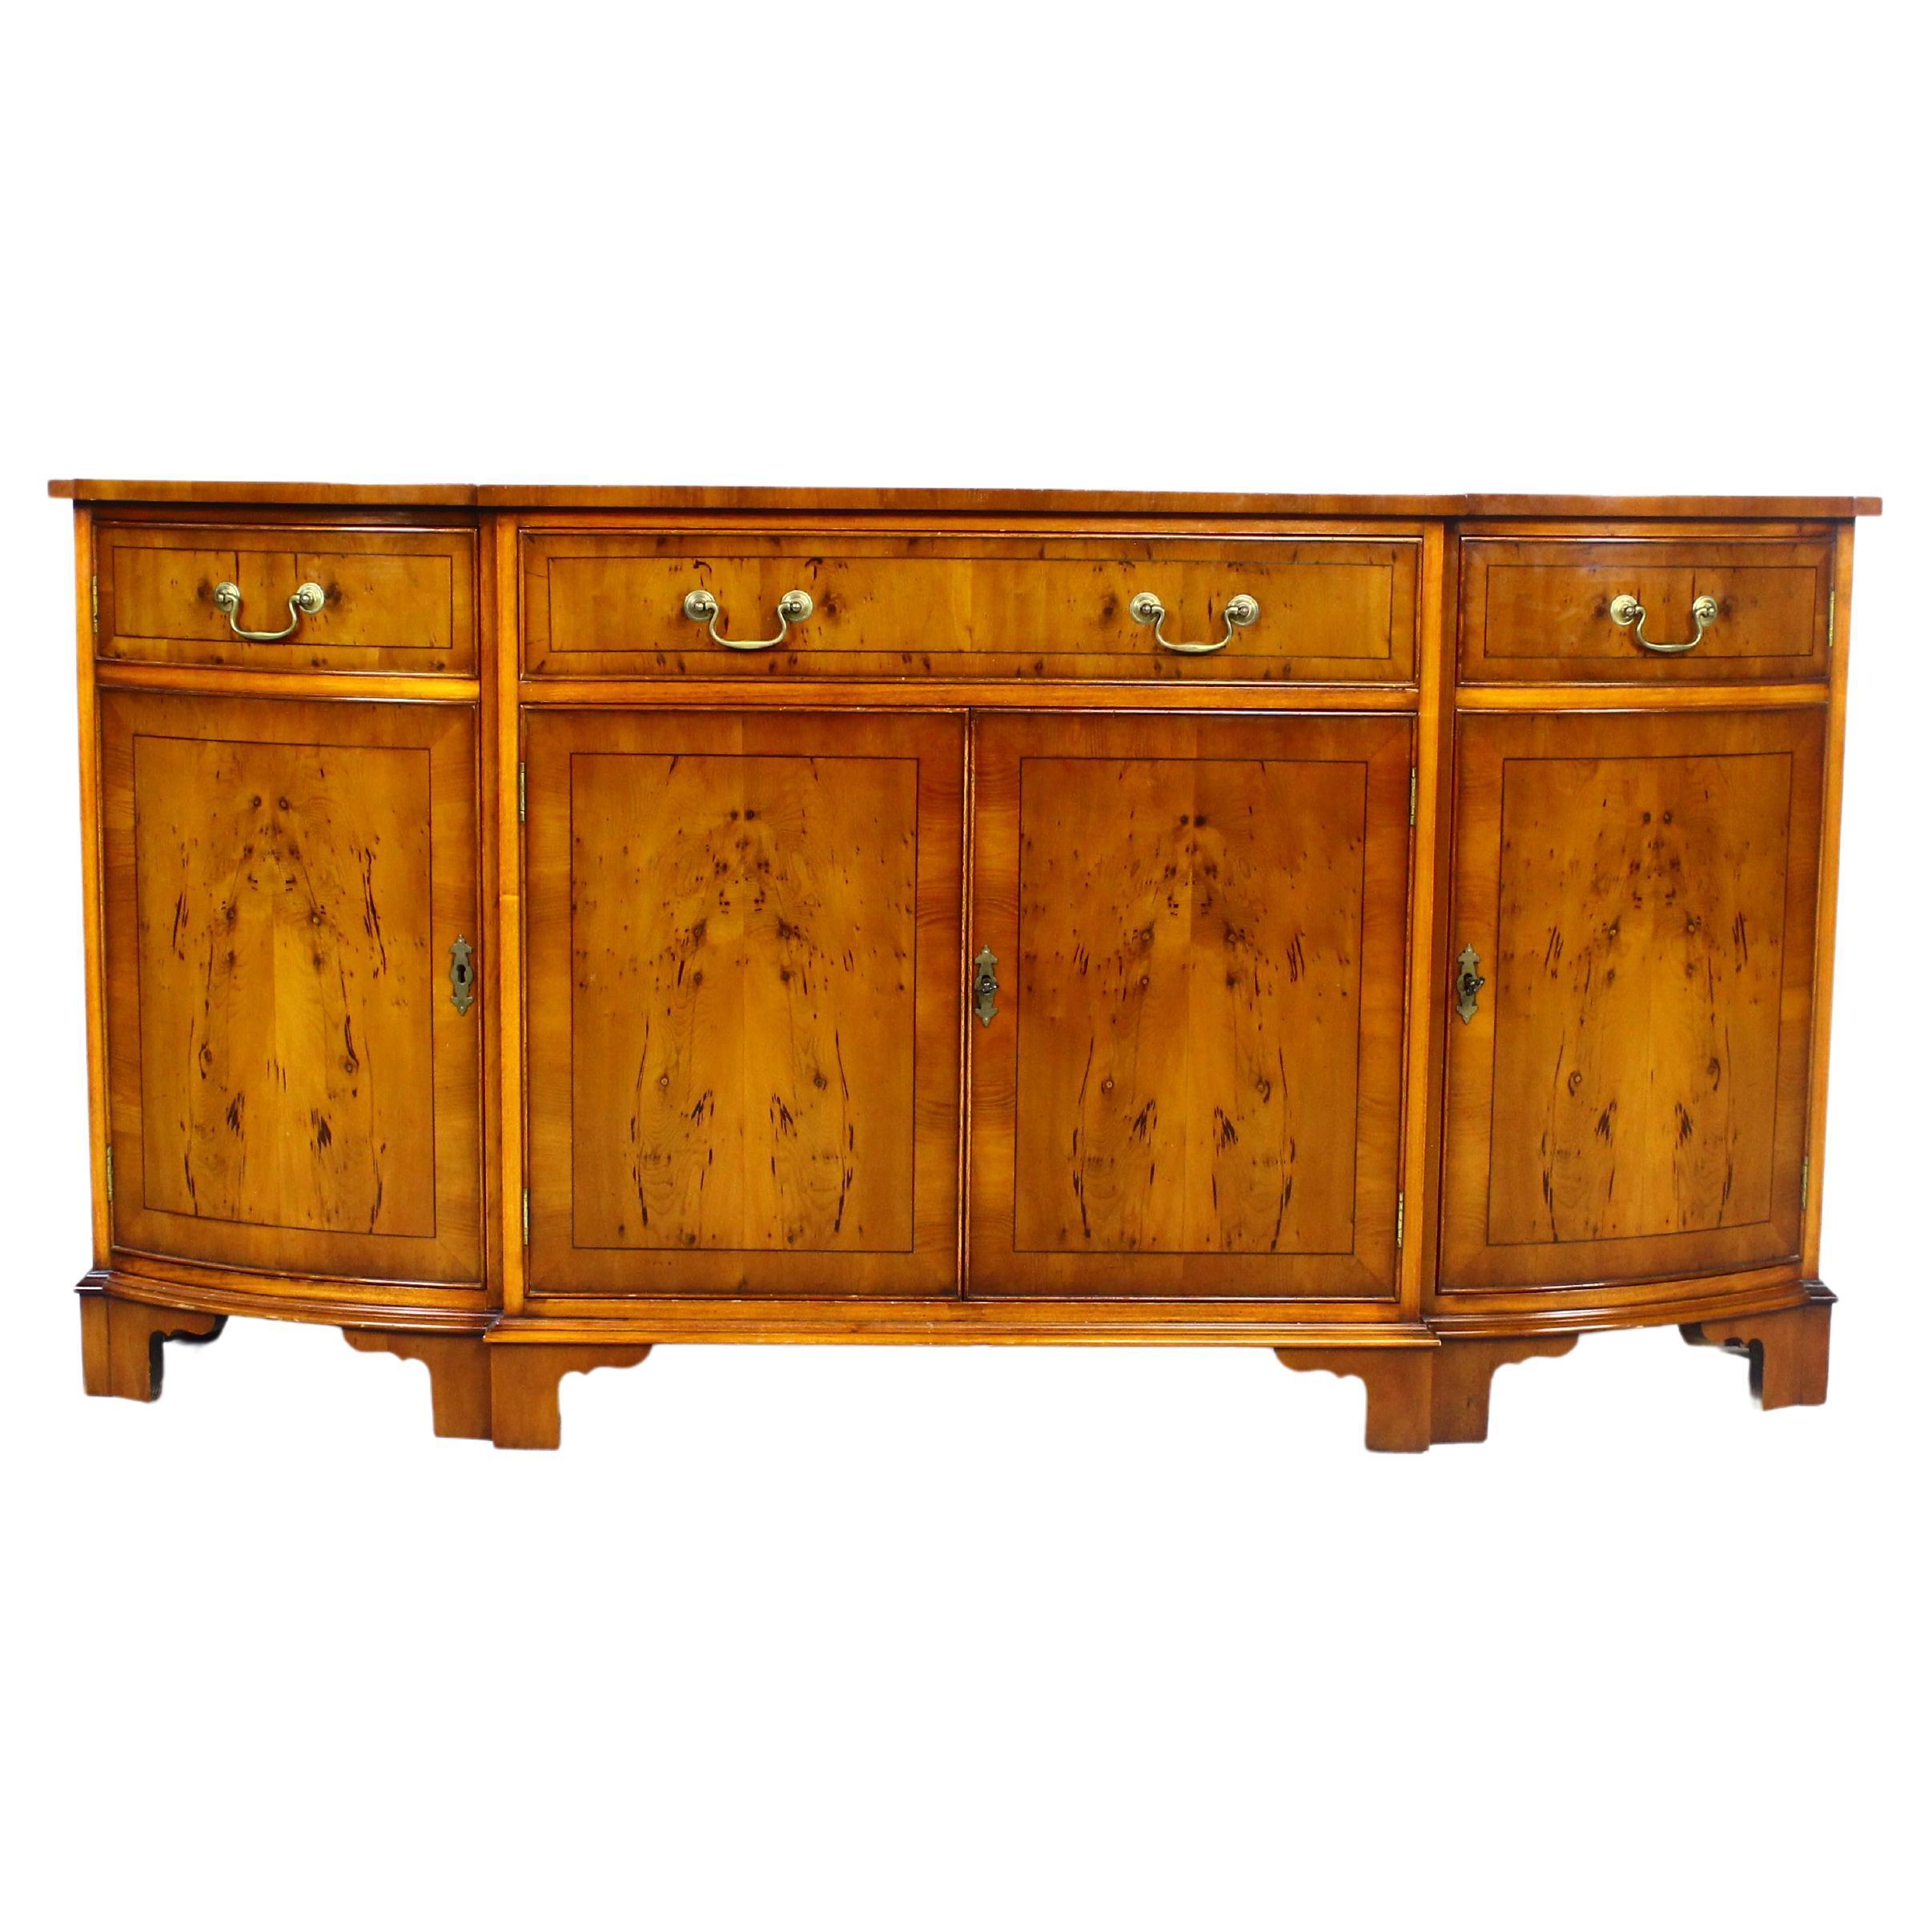 A VERY ATTRACTIVE, LATE 20th CENTURY, YEW-WOOD, INLAID AND CROSS-BANDED, BREAKFRONT SIDEBOARD, OF EXCEPTIONAL QUALITY AND CONDITION.

THIS FABULOUS SIDEBOARD IS ENGLISH MADE BY ONE OF THE LEADING FURNITURE MANUFACTURERS IN TODAYS MARKET PLACE, THE